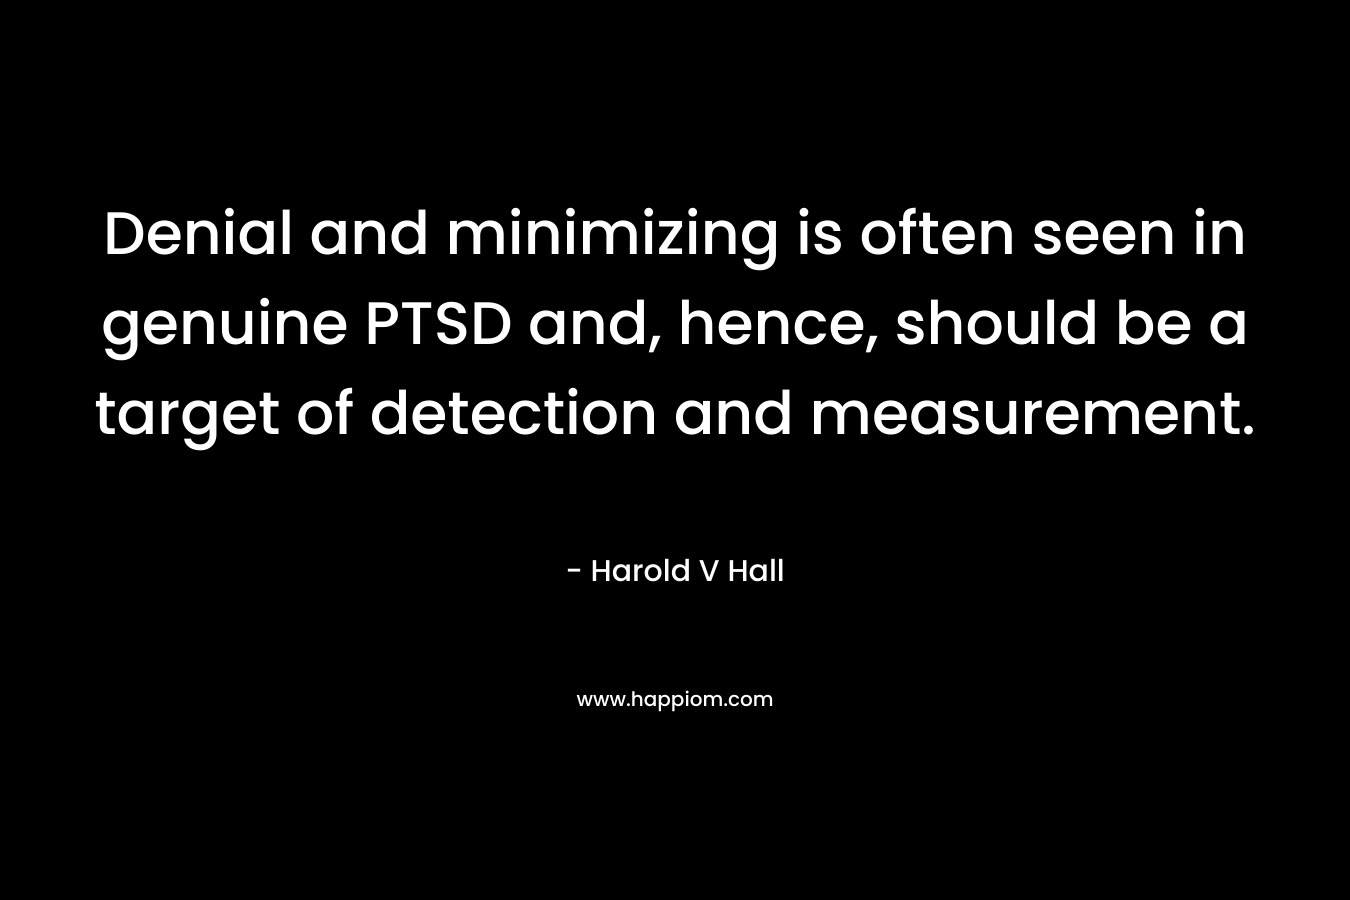 Denial and minimizing is often seen in genuine PTSD and, hence, should be a target of detection and measurement. – Harold V Hall